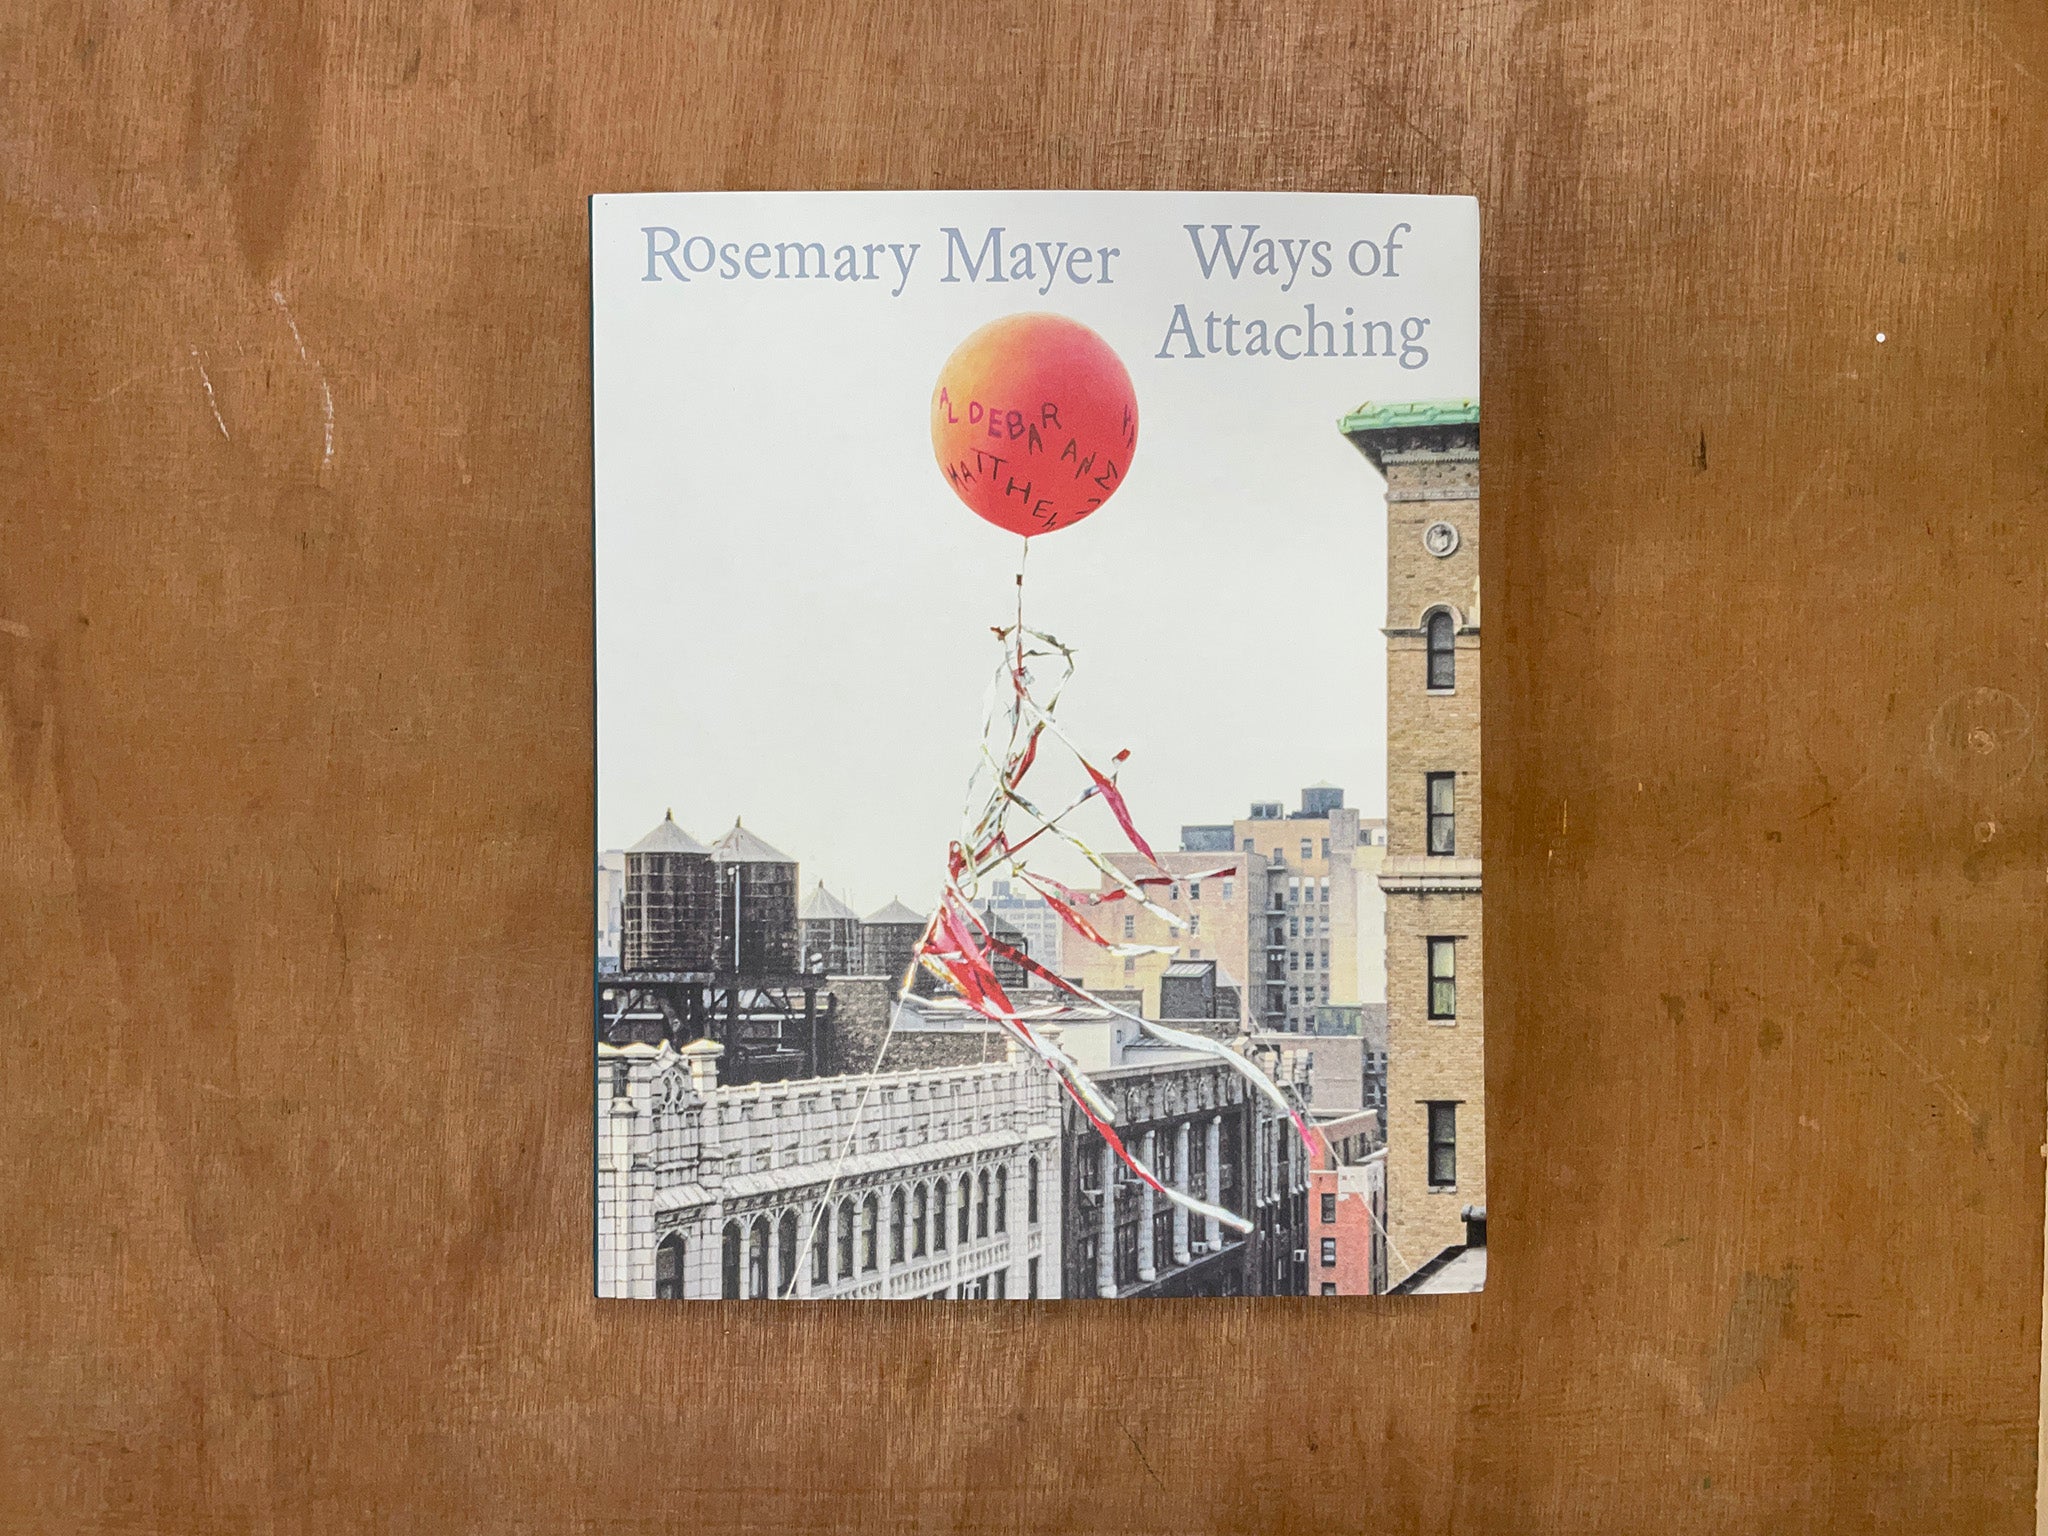 WAYS OF ATTACHING by Rosemary Mayer